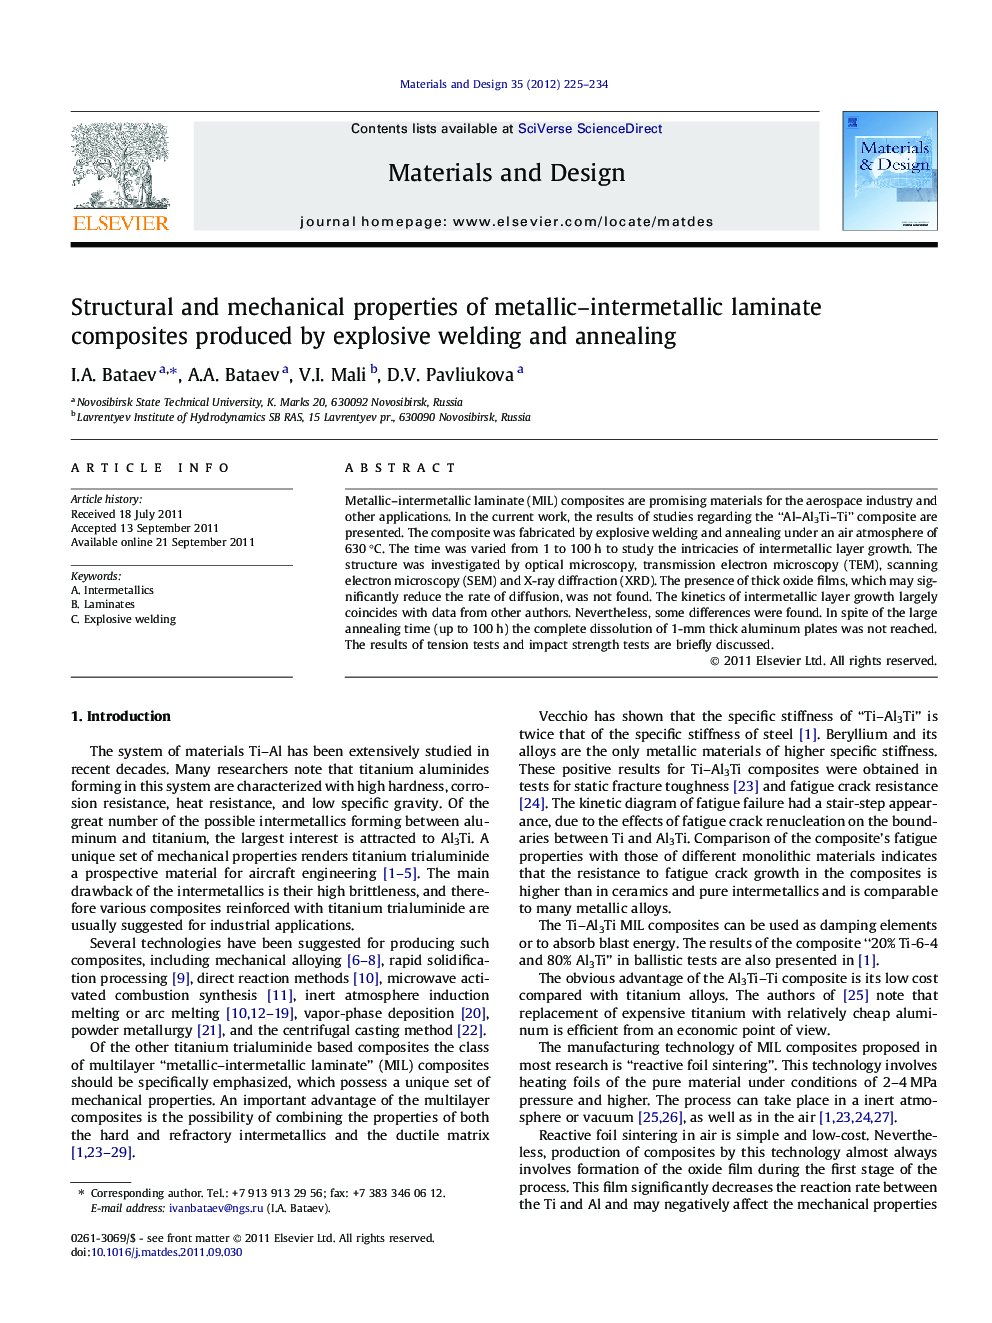 Structural and mechanical properties of metallic–intermetallic laminate composites produced by explosive welding and annealing